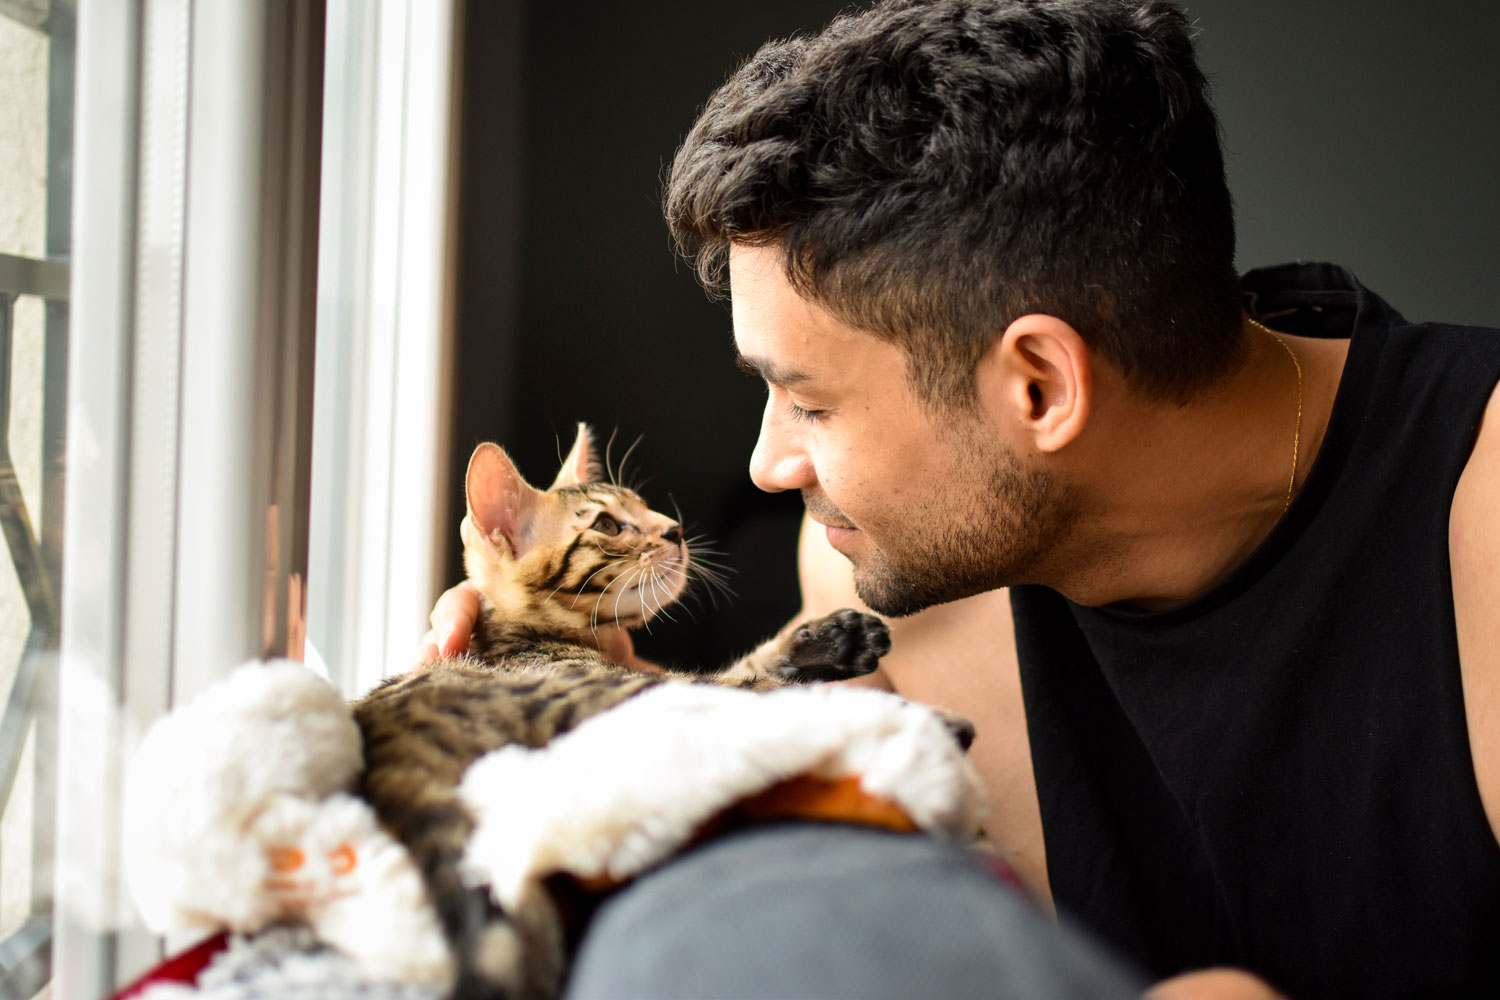 A man and a cat staring at each other near the window